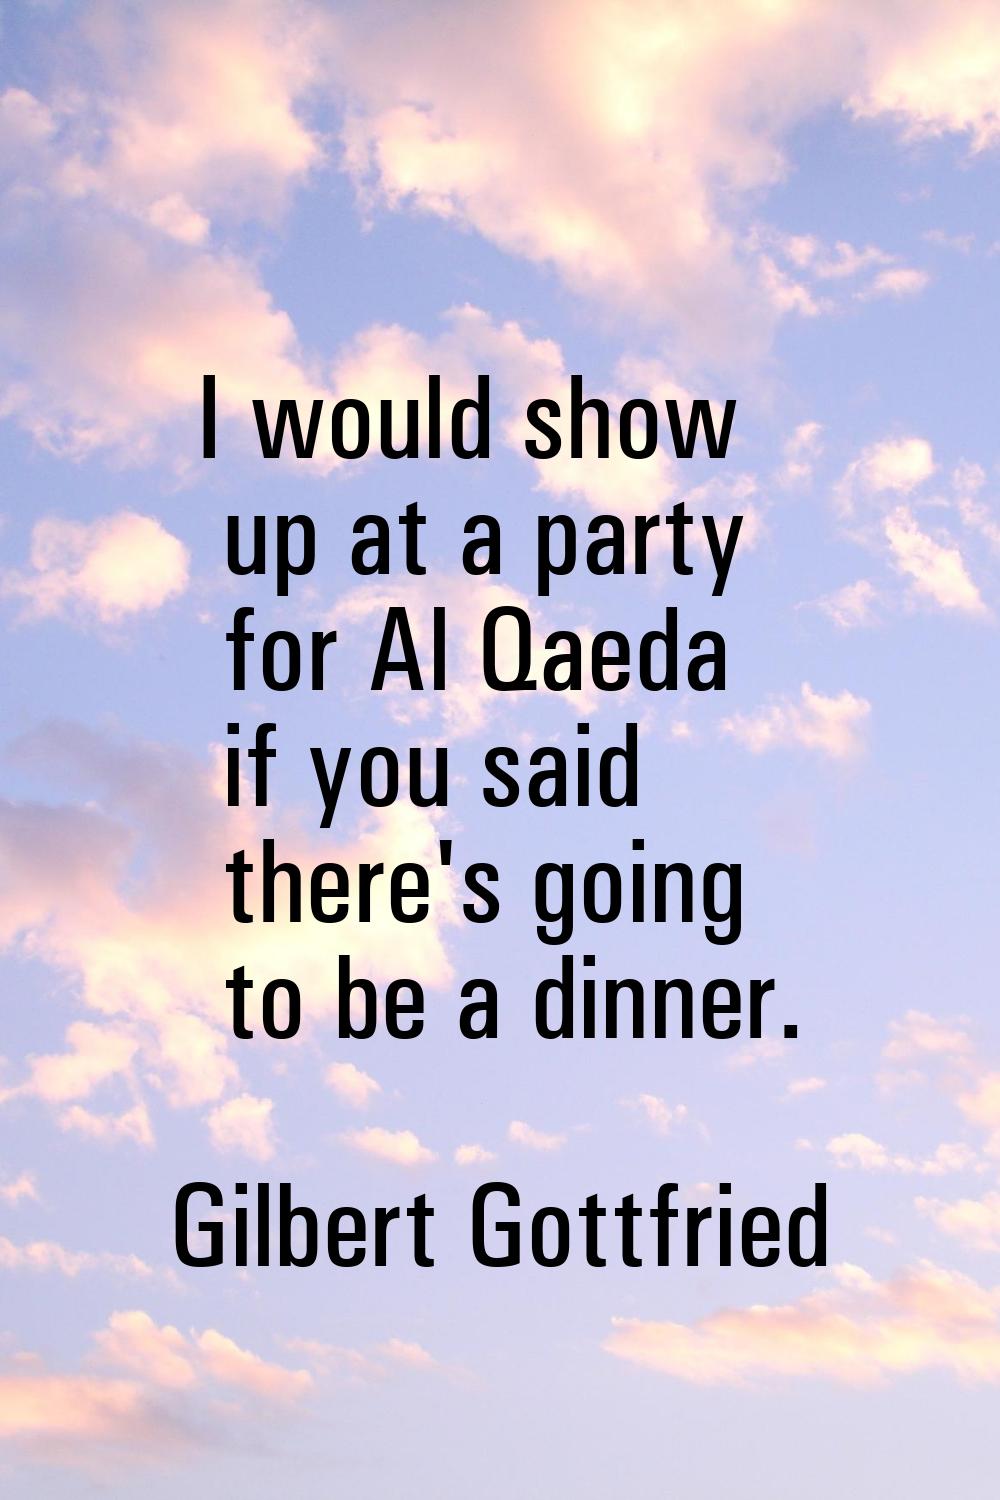 I would show up at a party for Al Qaeda if you said there's going to be a dinner.